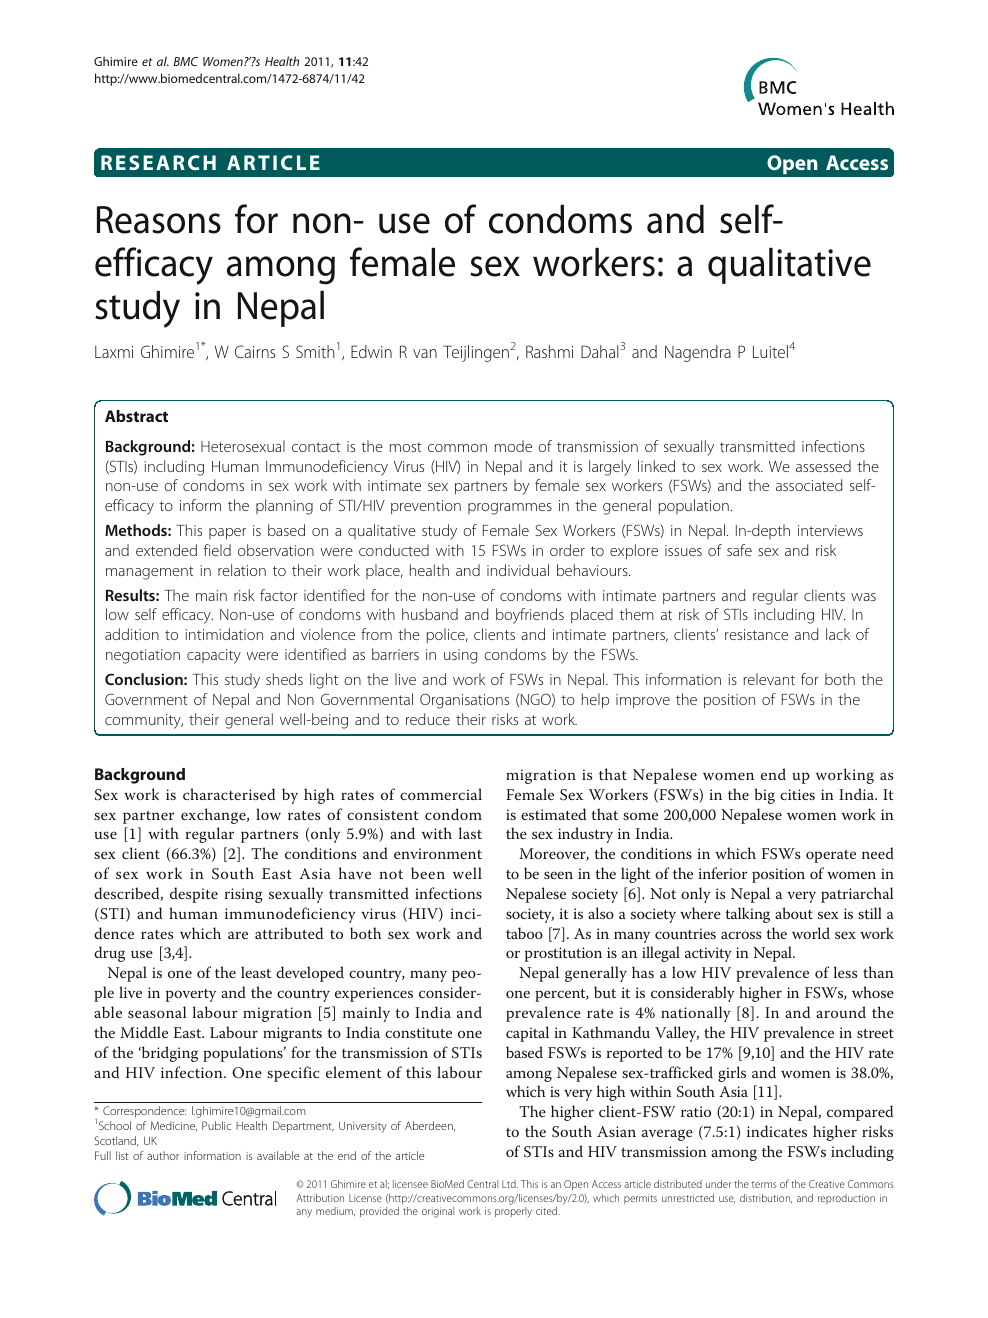 Reasons for non- use of condoms and self- efficacy among female sex workers a qualitative study in Nepal photo